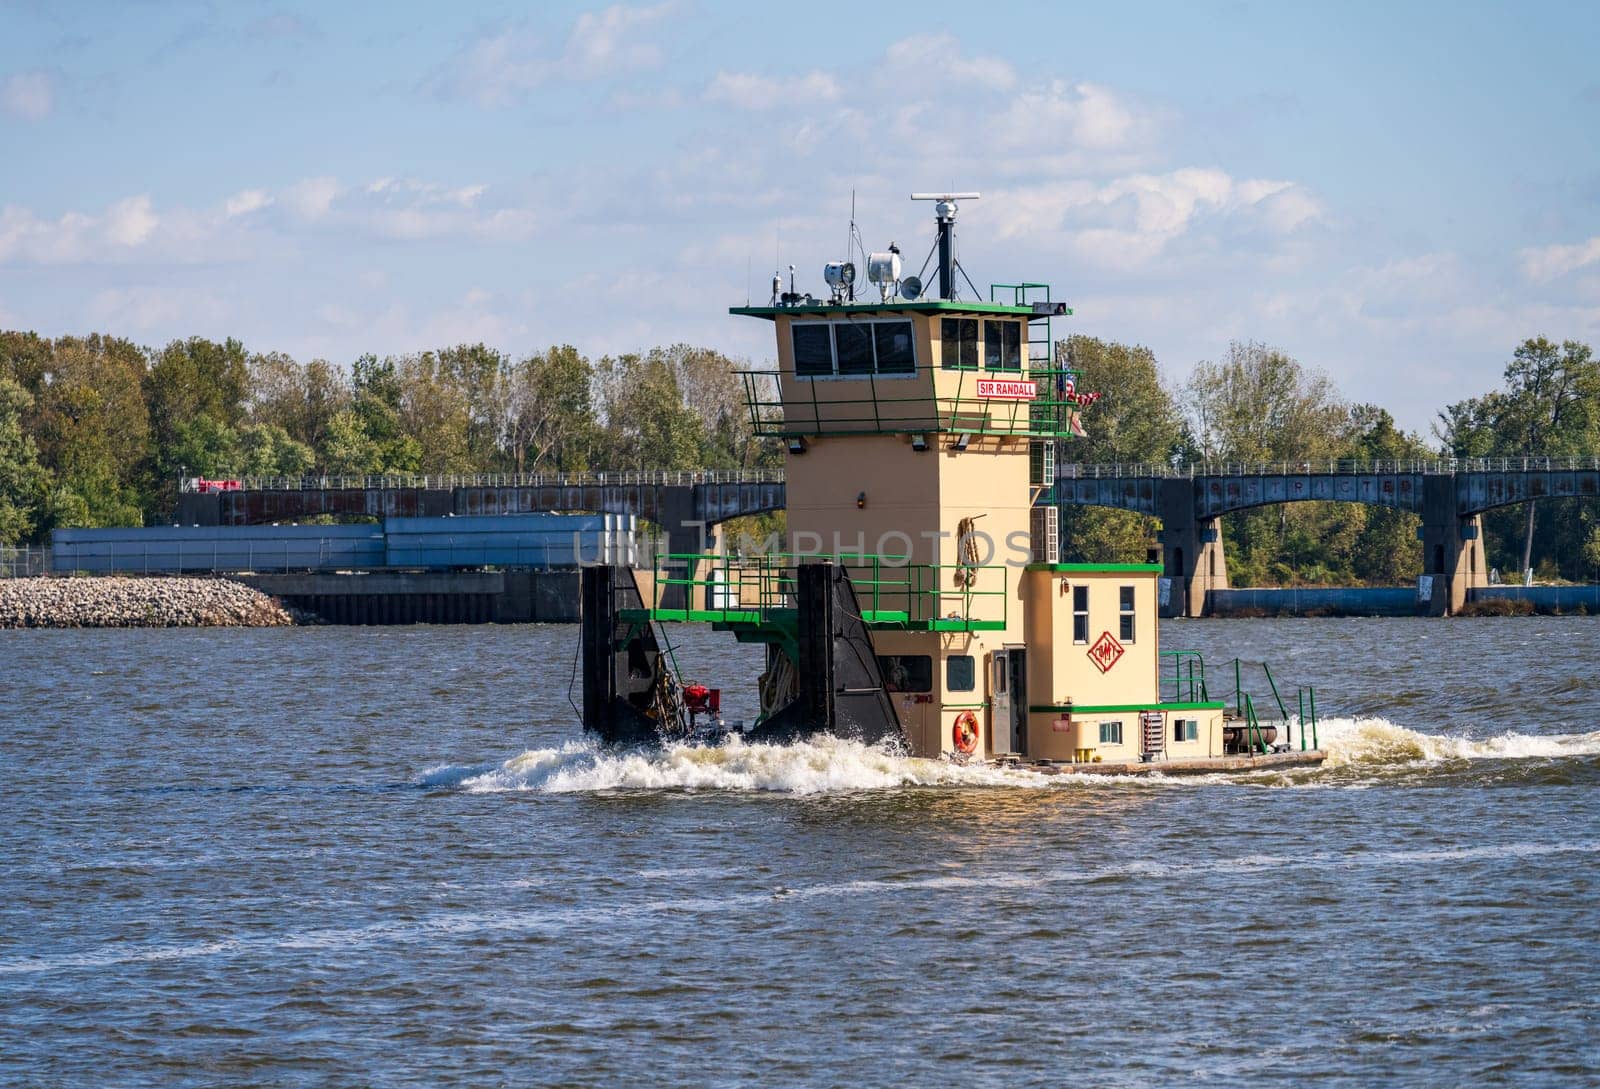 Tug boat or pusher boat leaving Lock and Dam 22 on Mississippi river by steheap